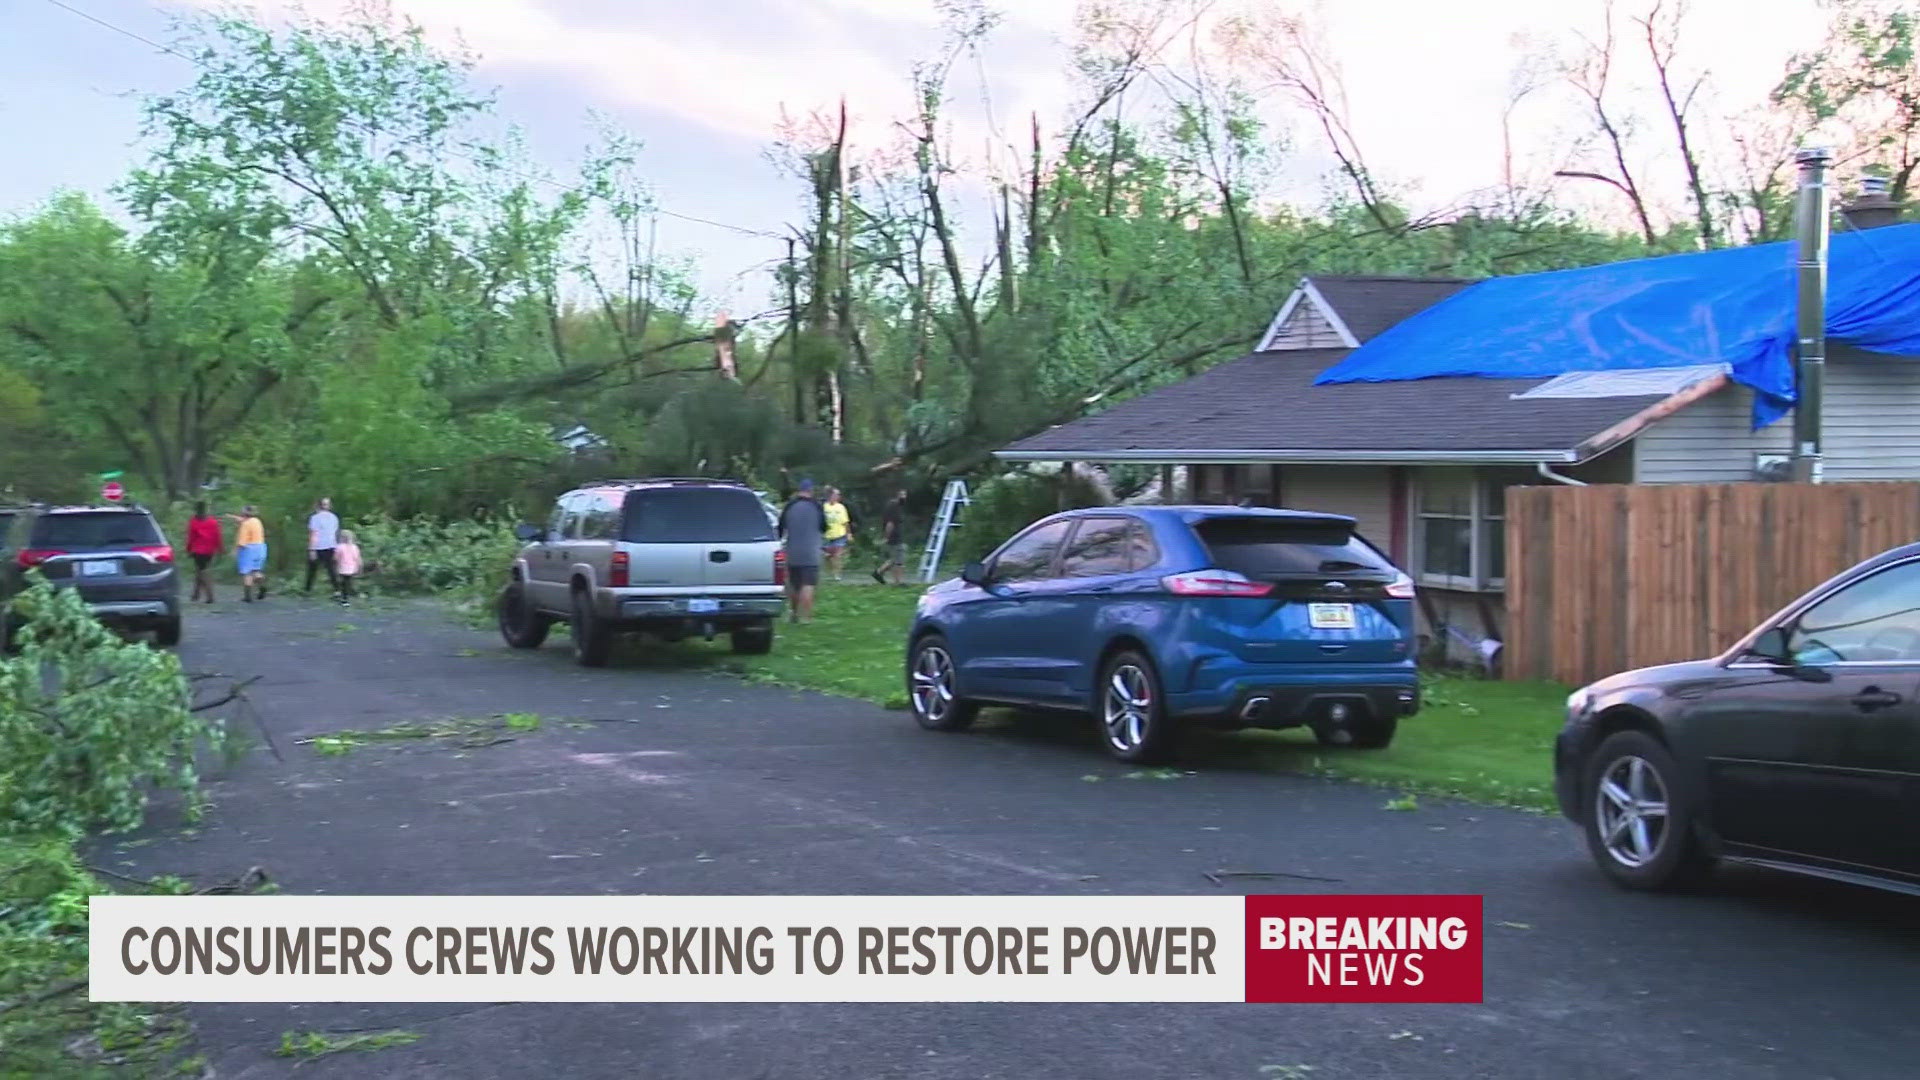 Consumers Energy crews are working to restore power in Kalamazoo and St. Joseph counties following Tuesday's severe weather.